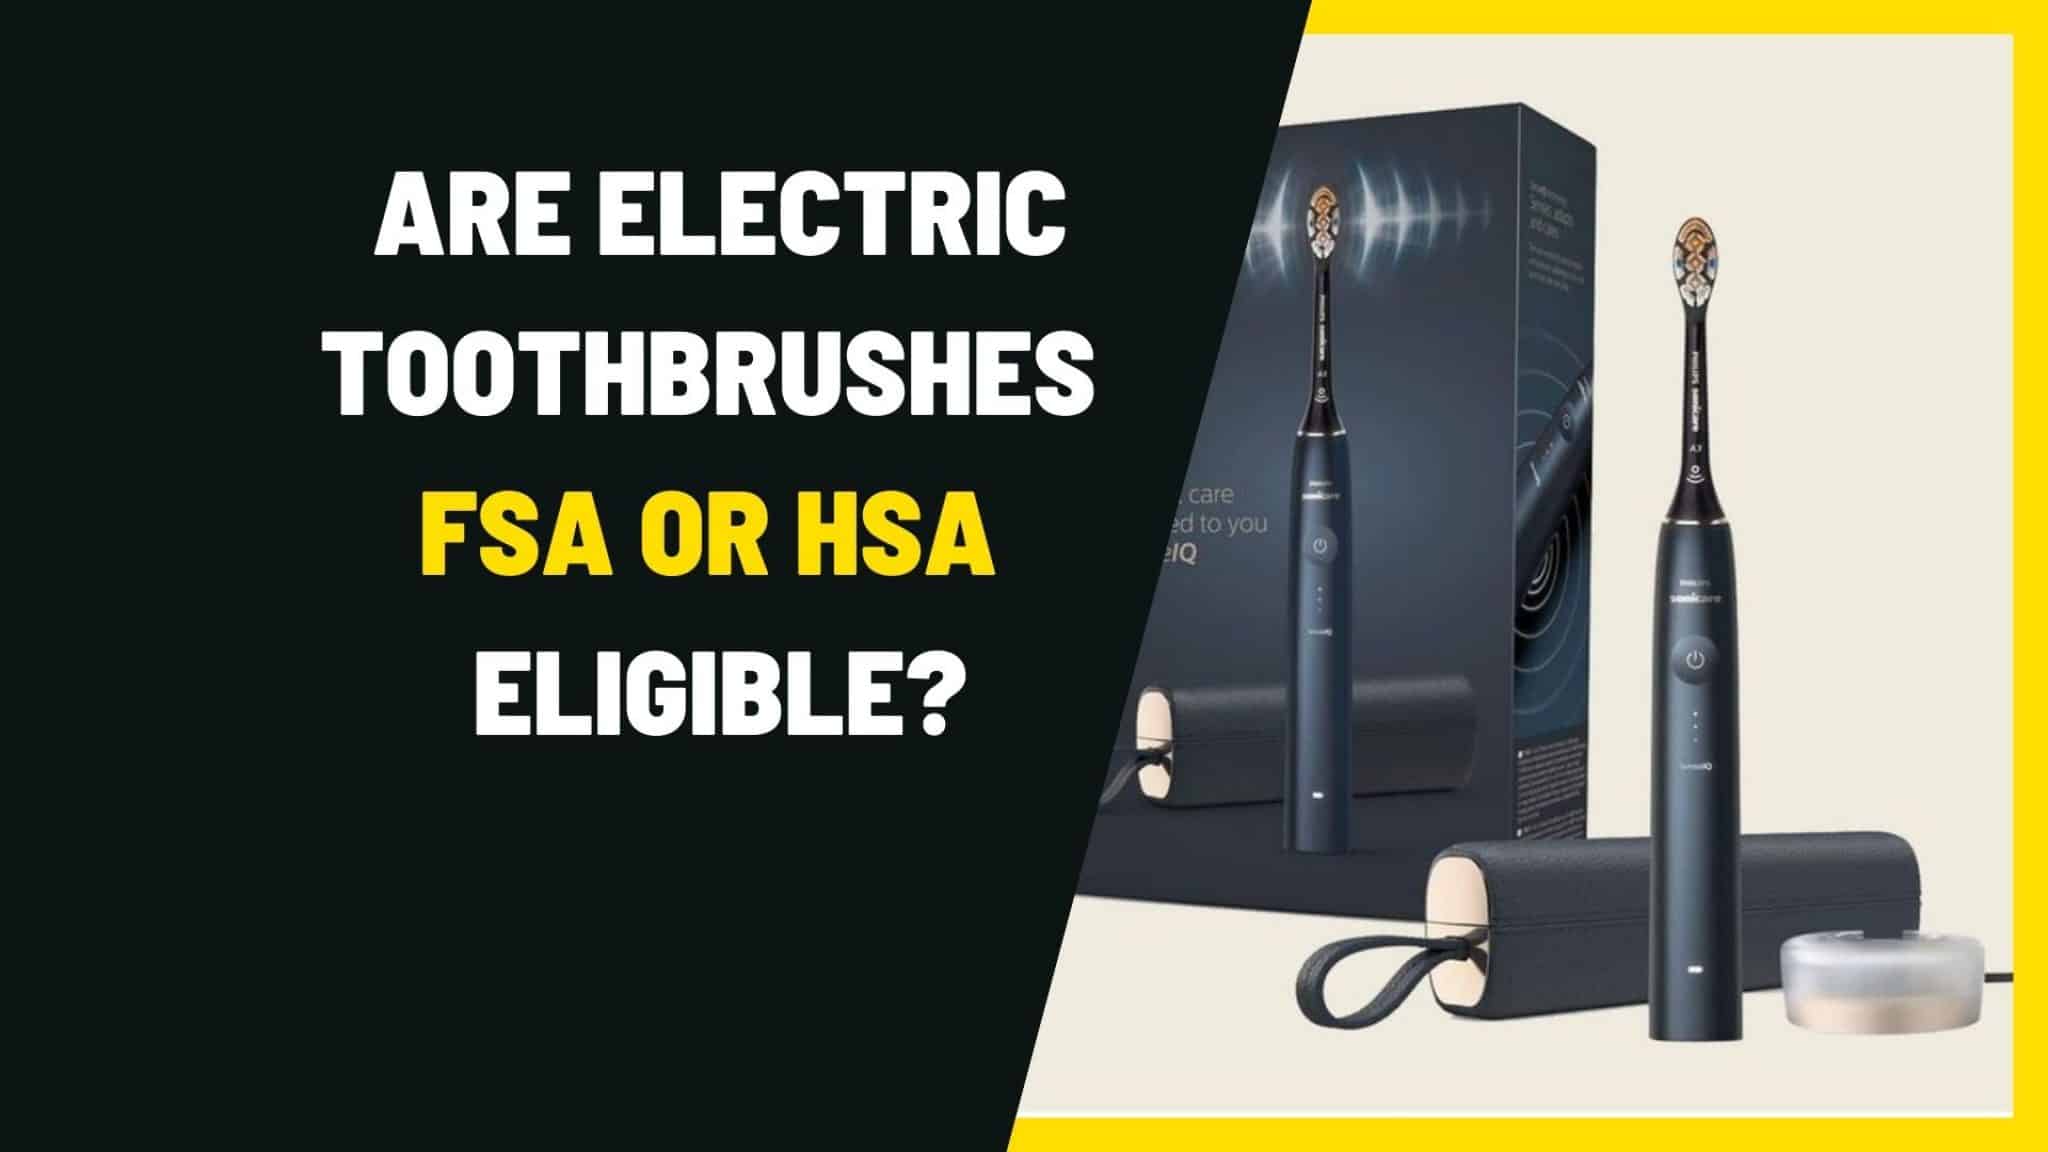 Is Sonicare Toothbrush Fsa Eligible